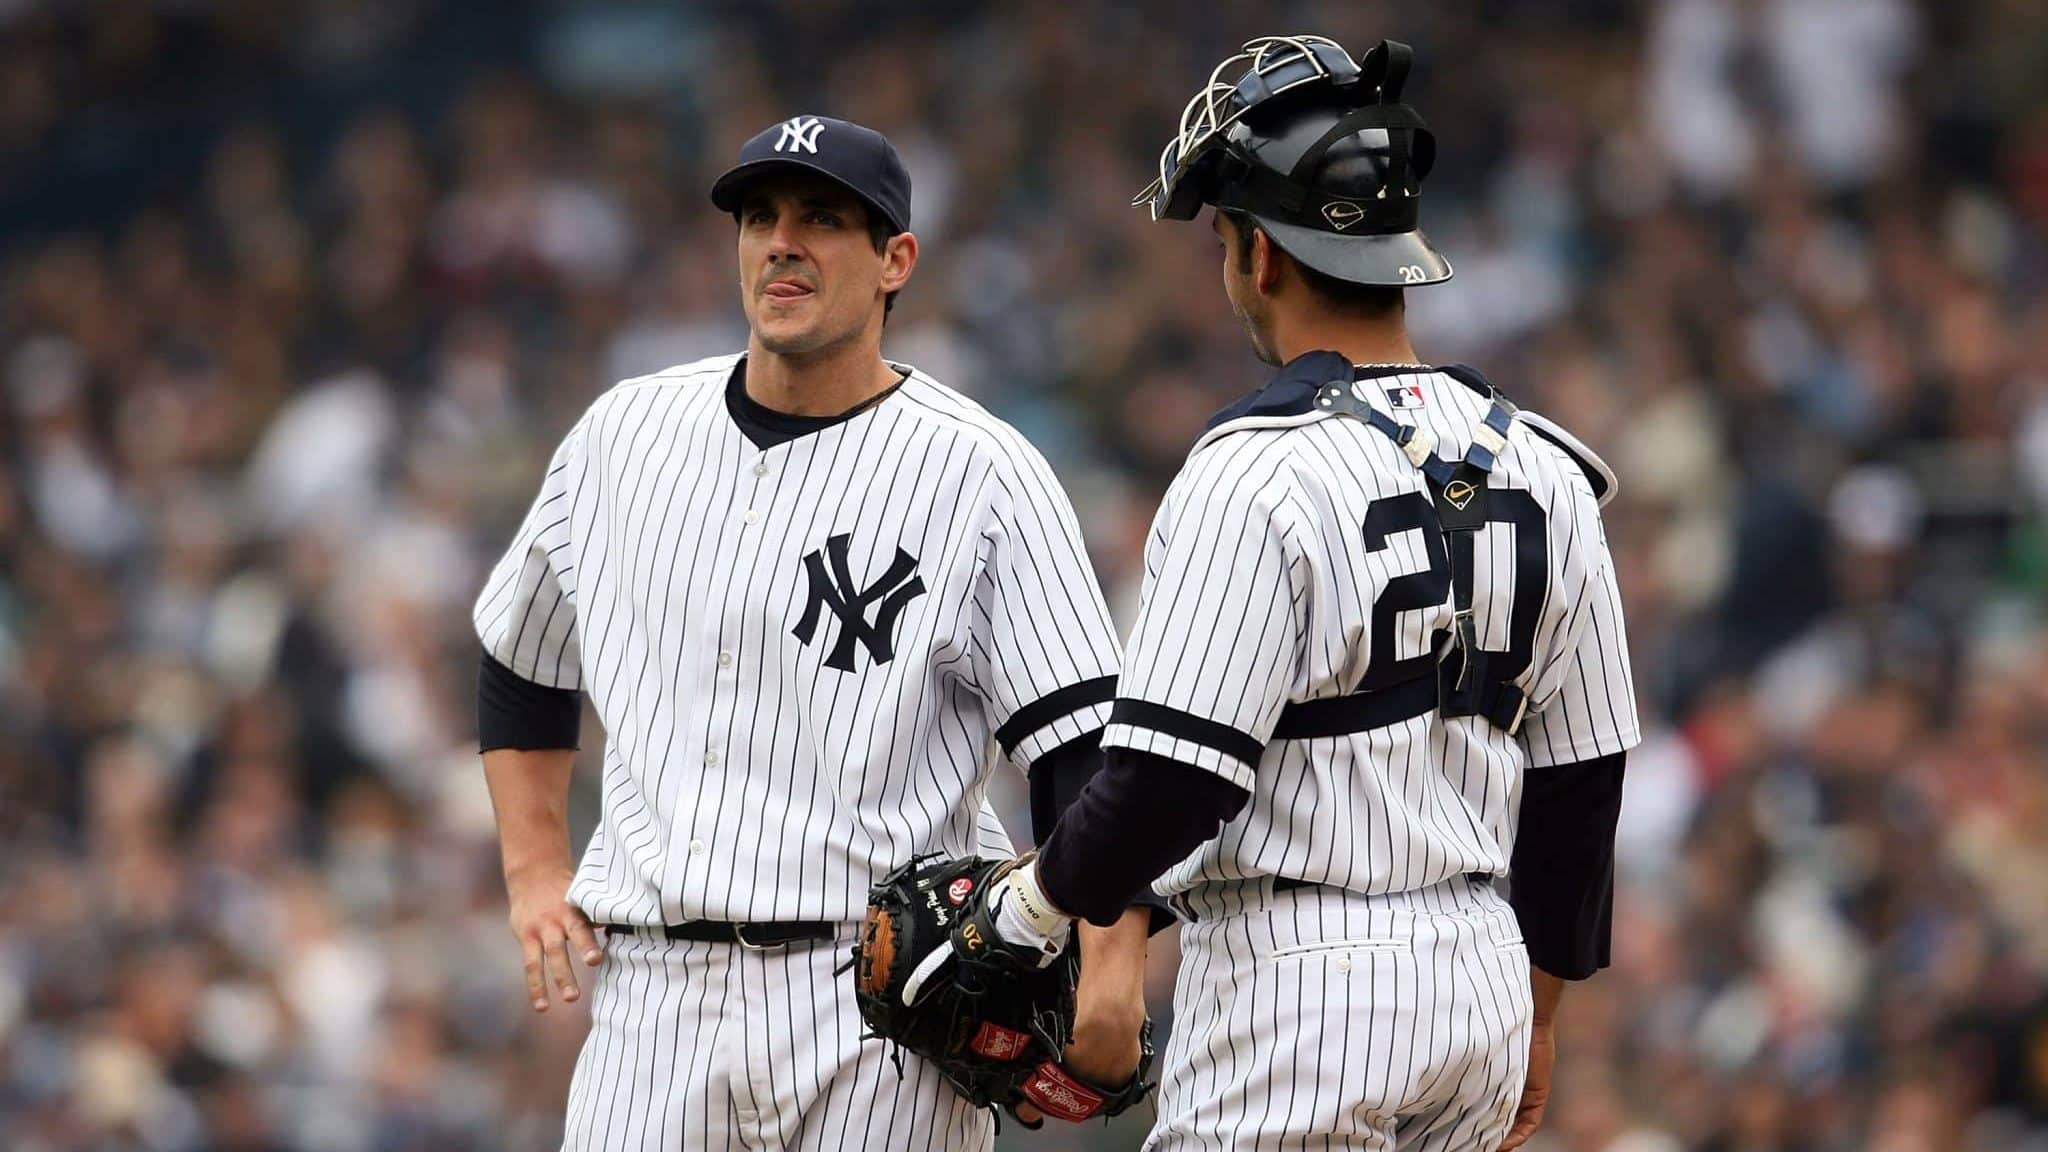 NEW YORK - APRIL 02: Starting pitcher Carl Pavano #45 of the New York Yankees talks with catcher Jorge Posada #20 on the mound after pitching against the Tampa Bay Devil Rays during their Opening Day game at Yankee Stadium April 2, 2007 in the Bronx borough of New York City. The Yankees defeated the Devil Rays, 9-5.